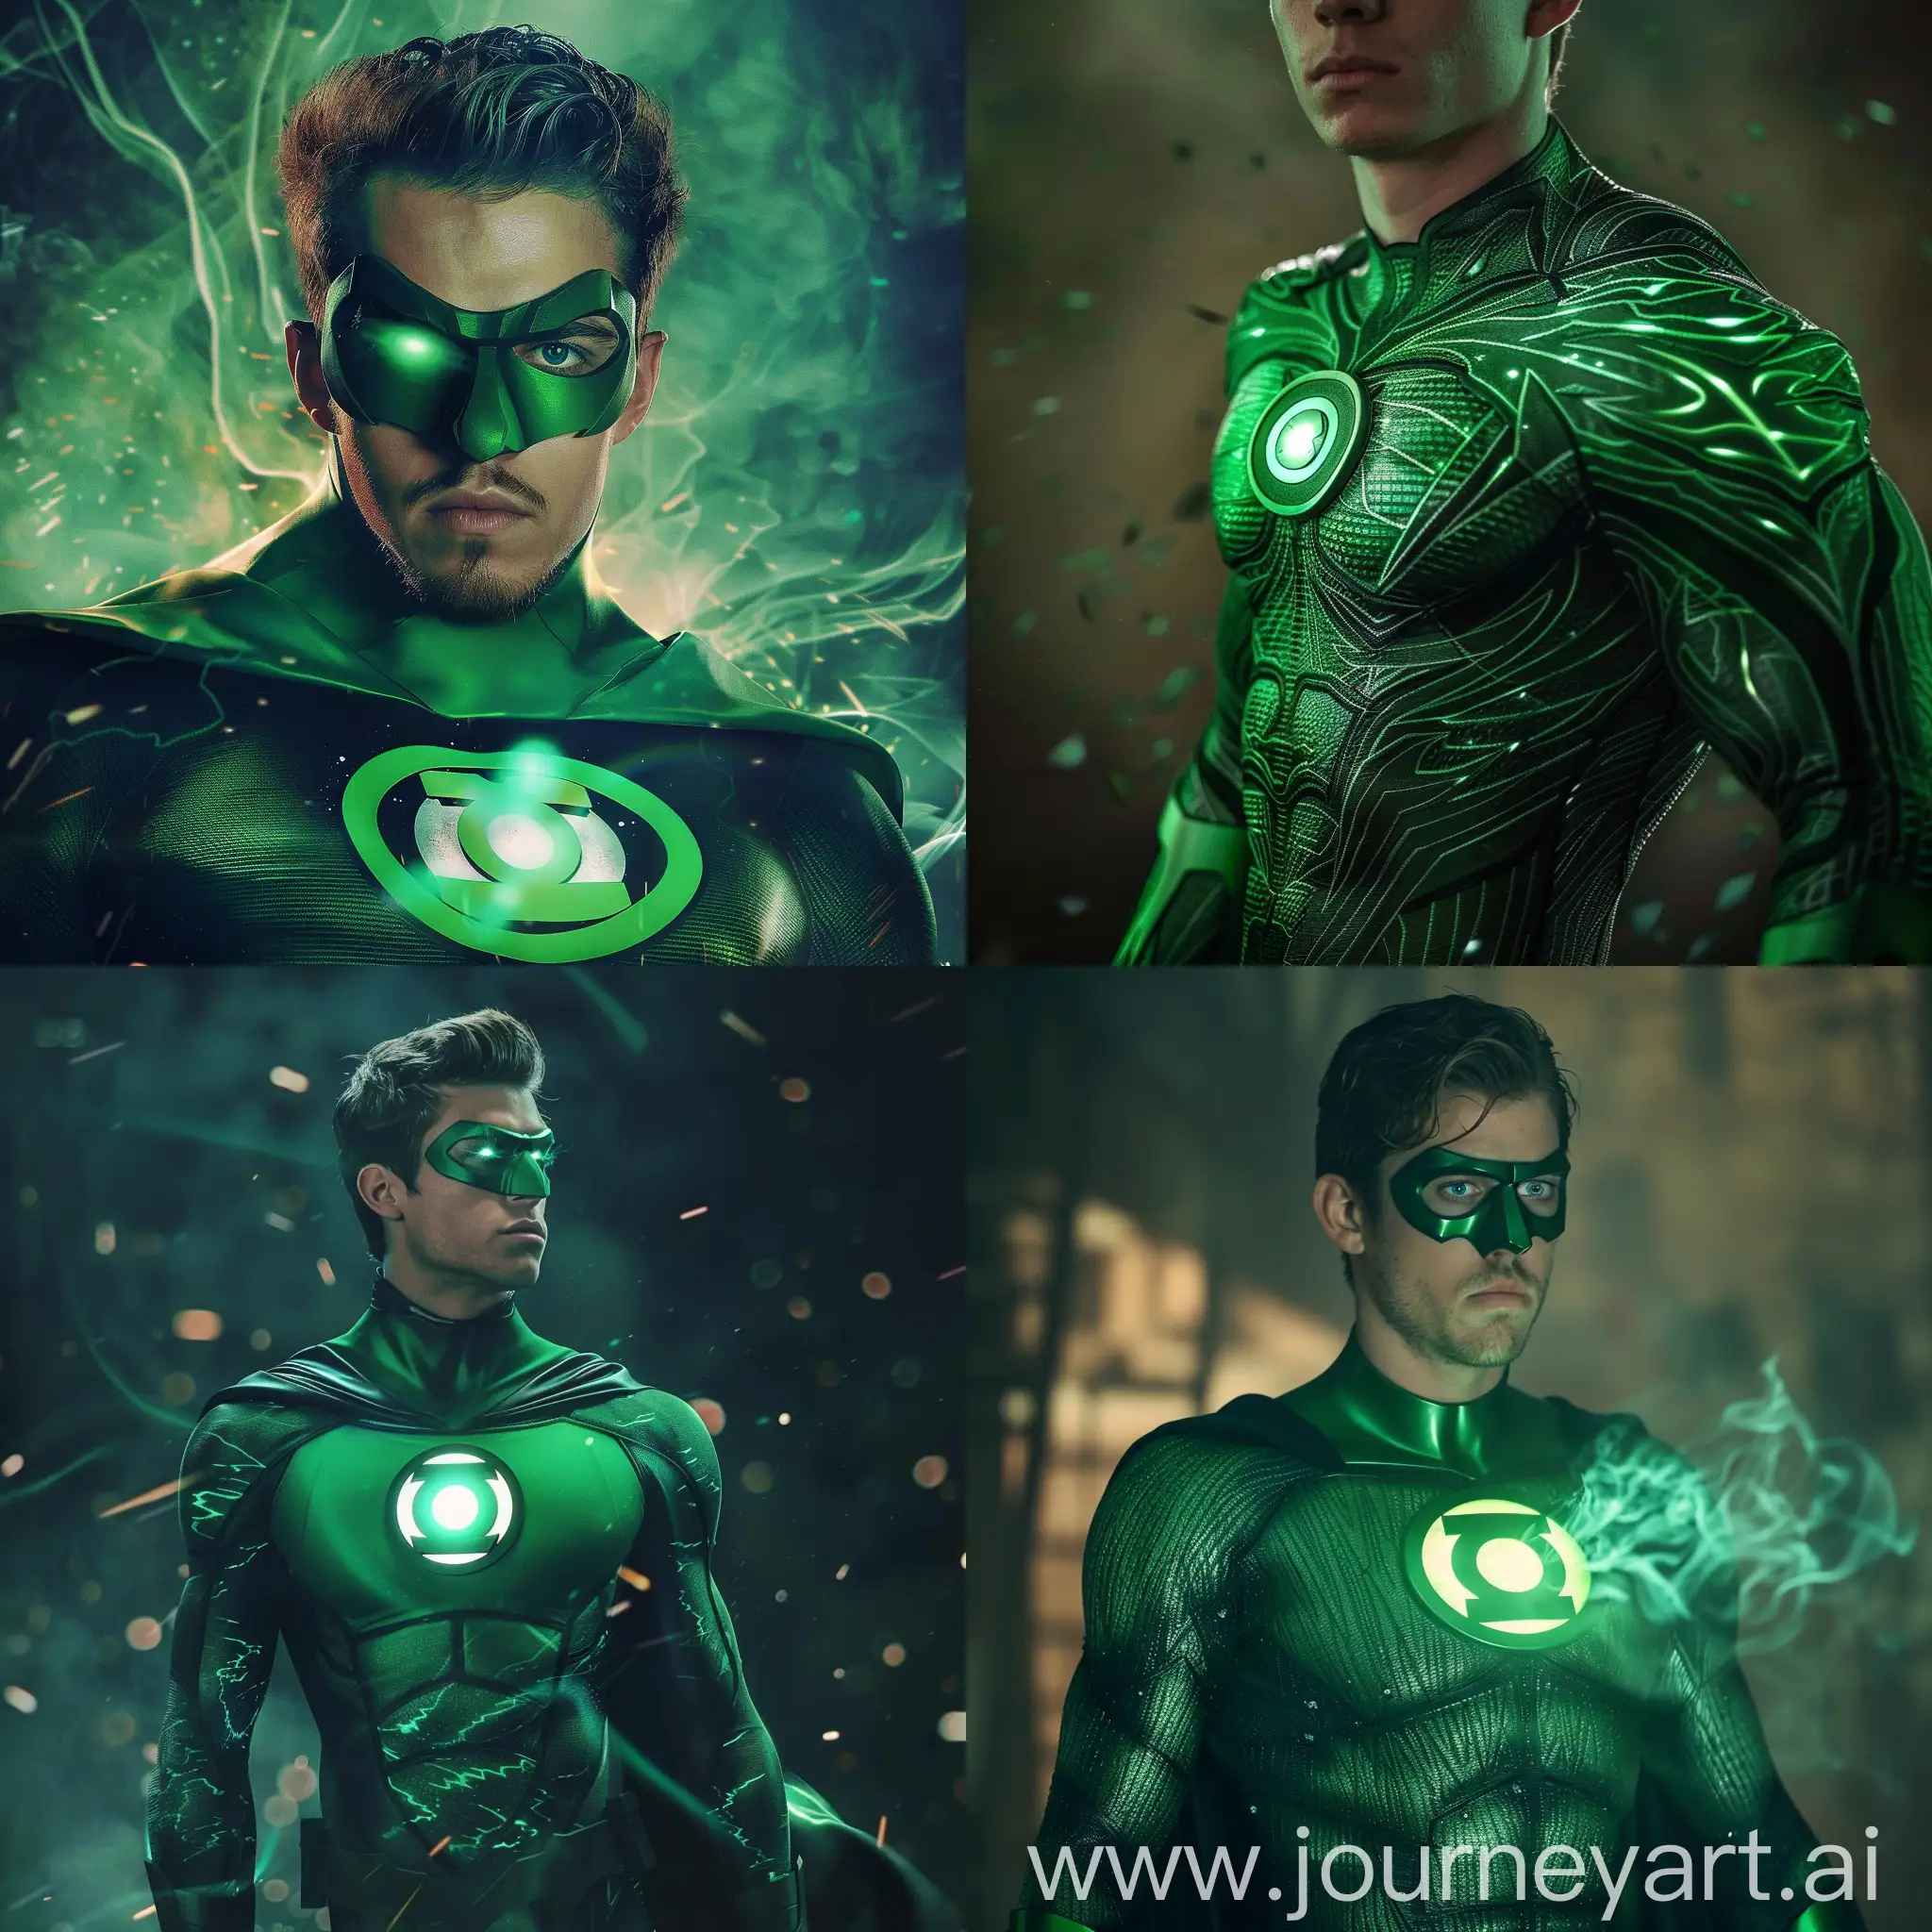 Austin-Butler-as-The-Green-Lantern-Heroic-Portrayal-in-Square-Format-Image